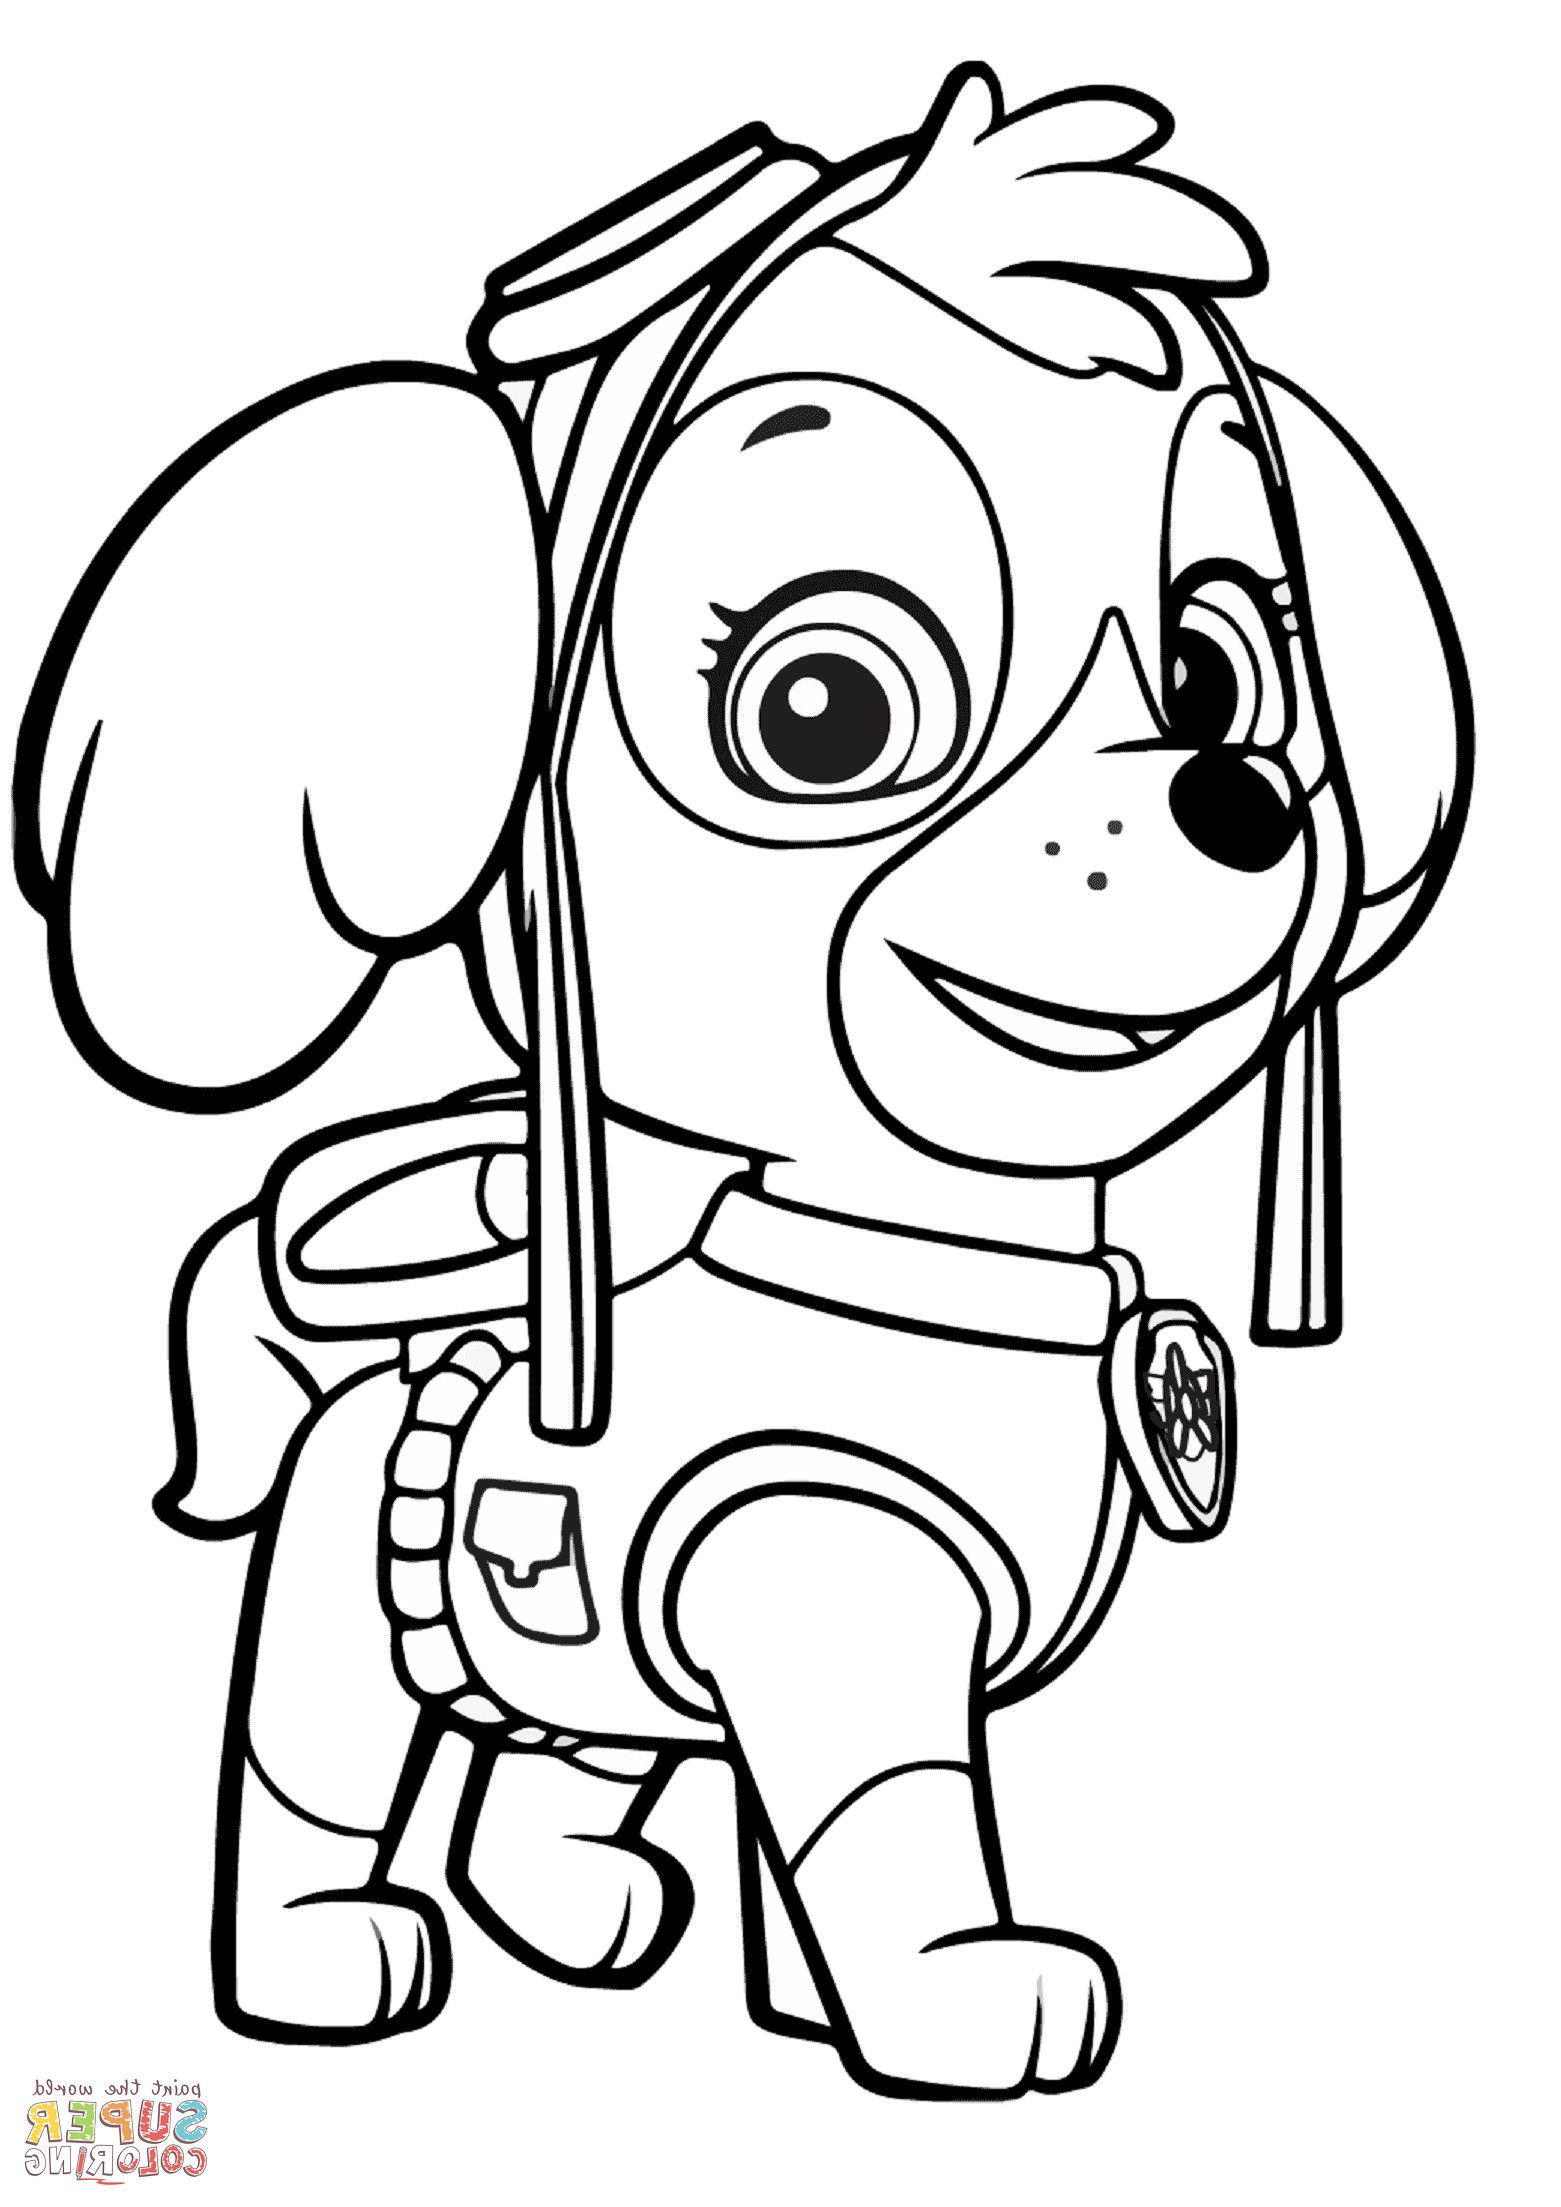 Paw Patrol Coloring Pages FREE Printable 34